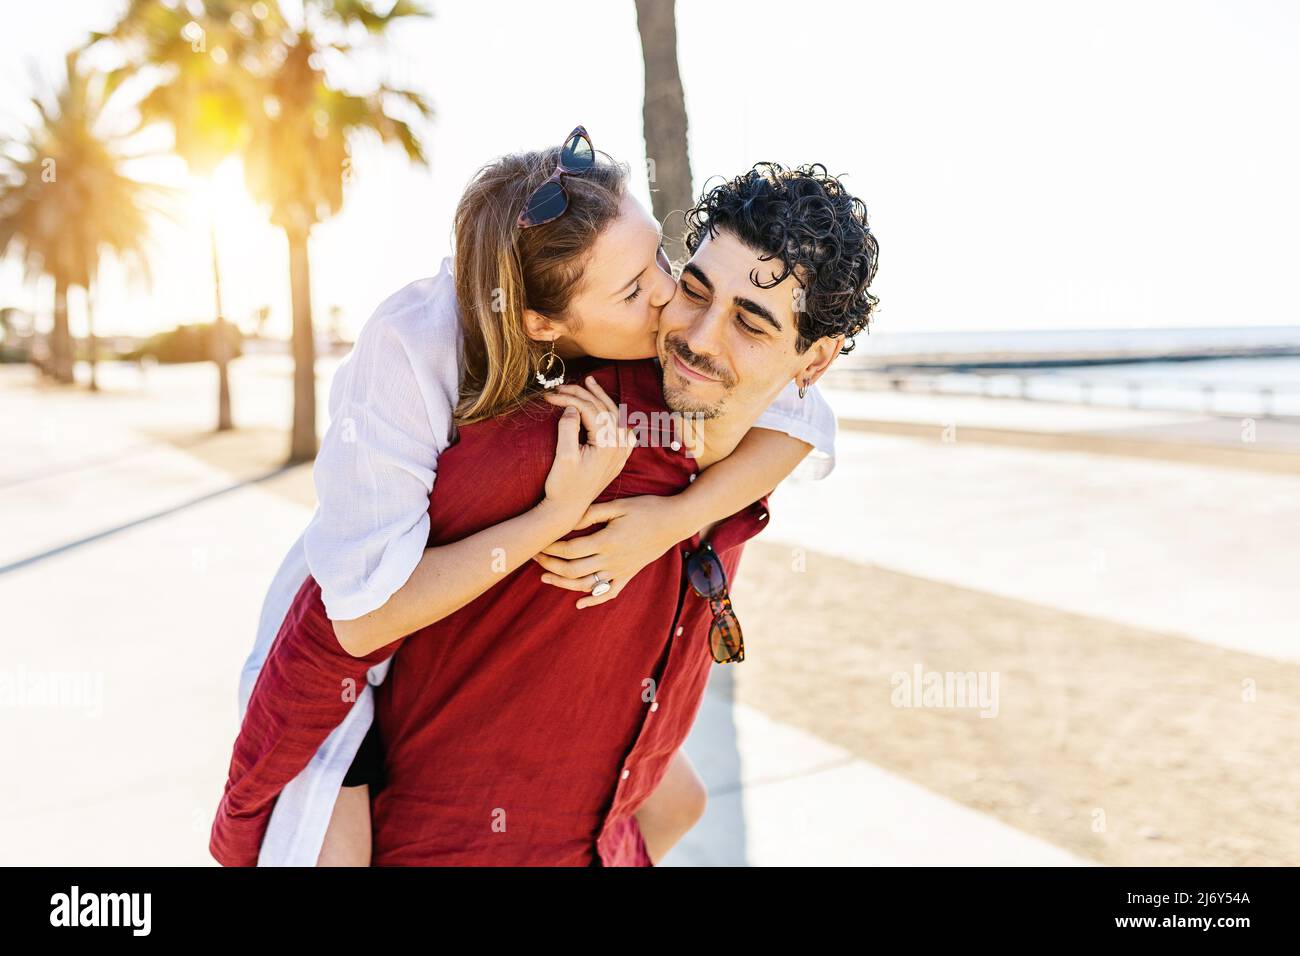 Happy couple in love enjoying their summer vacation together. Stock Photo